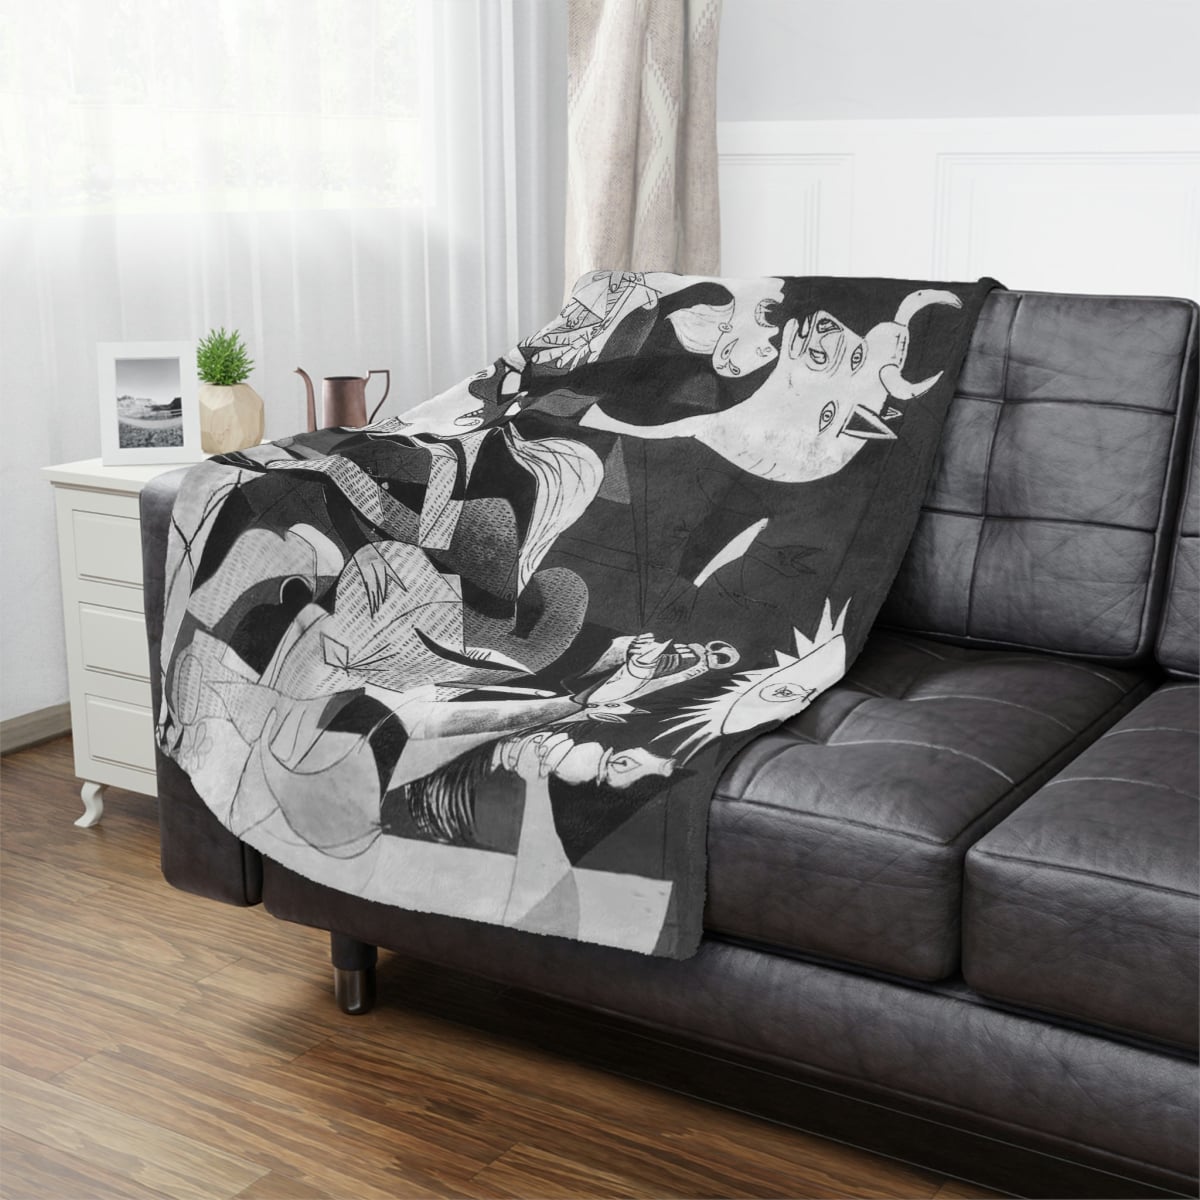 Aesthetic Picasso art on a soft and stylish blanket